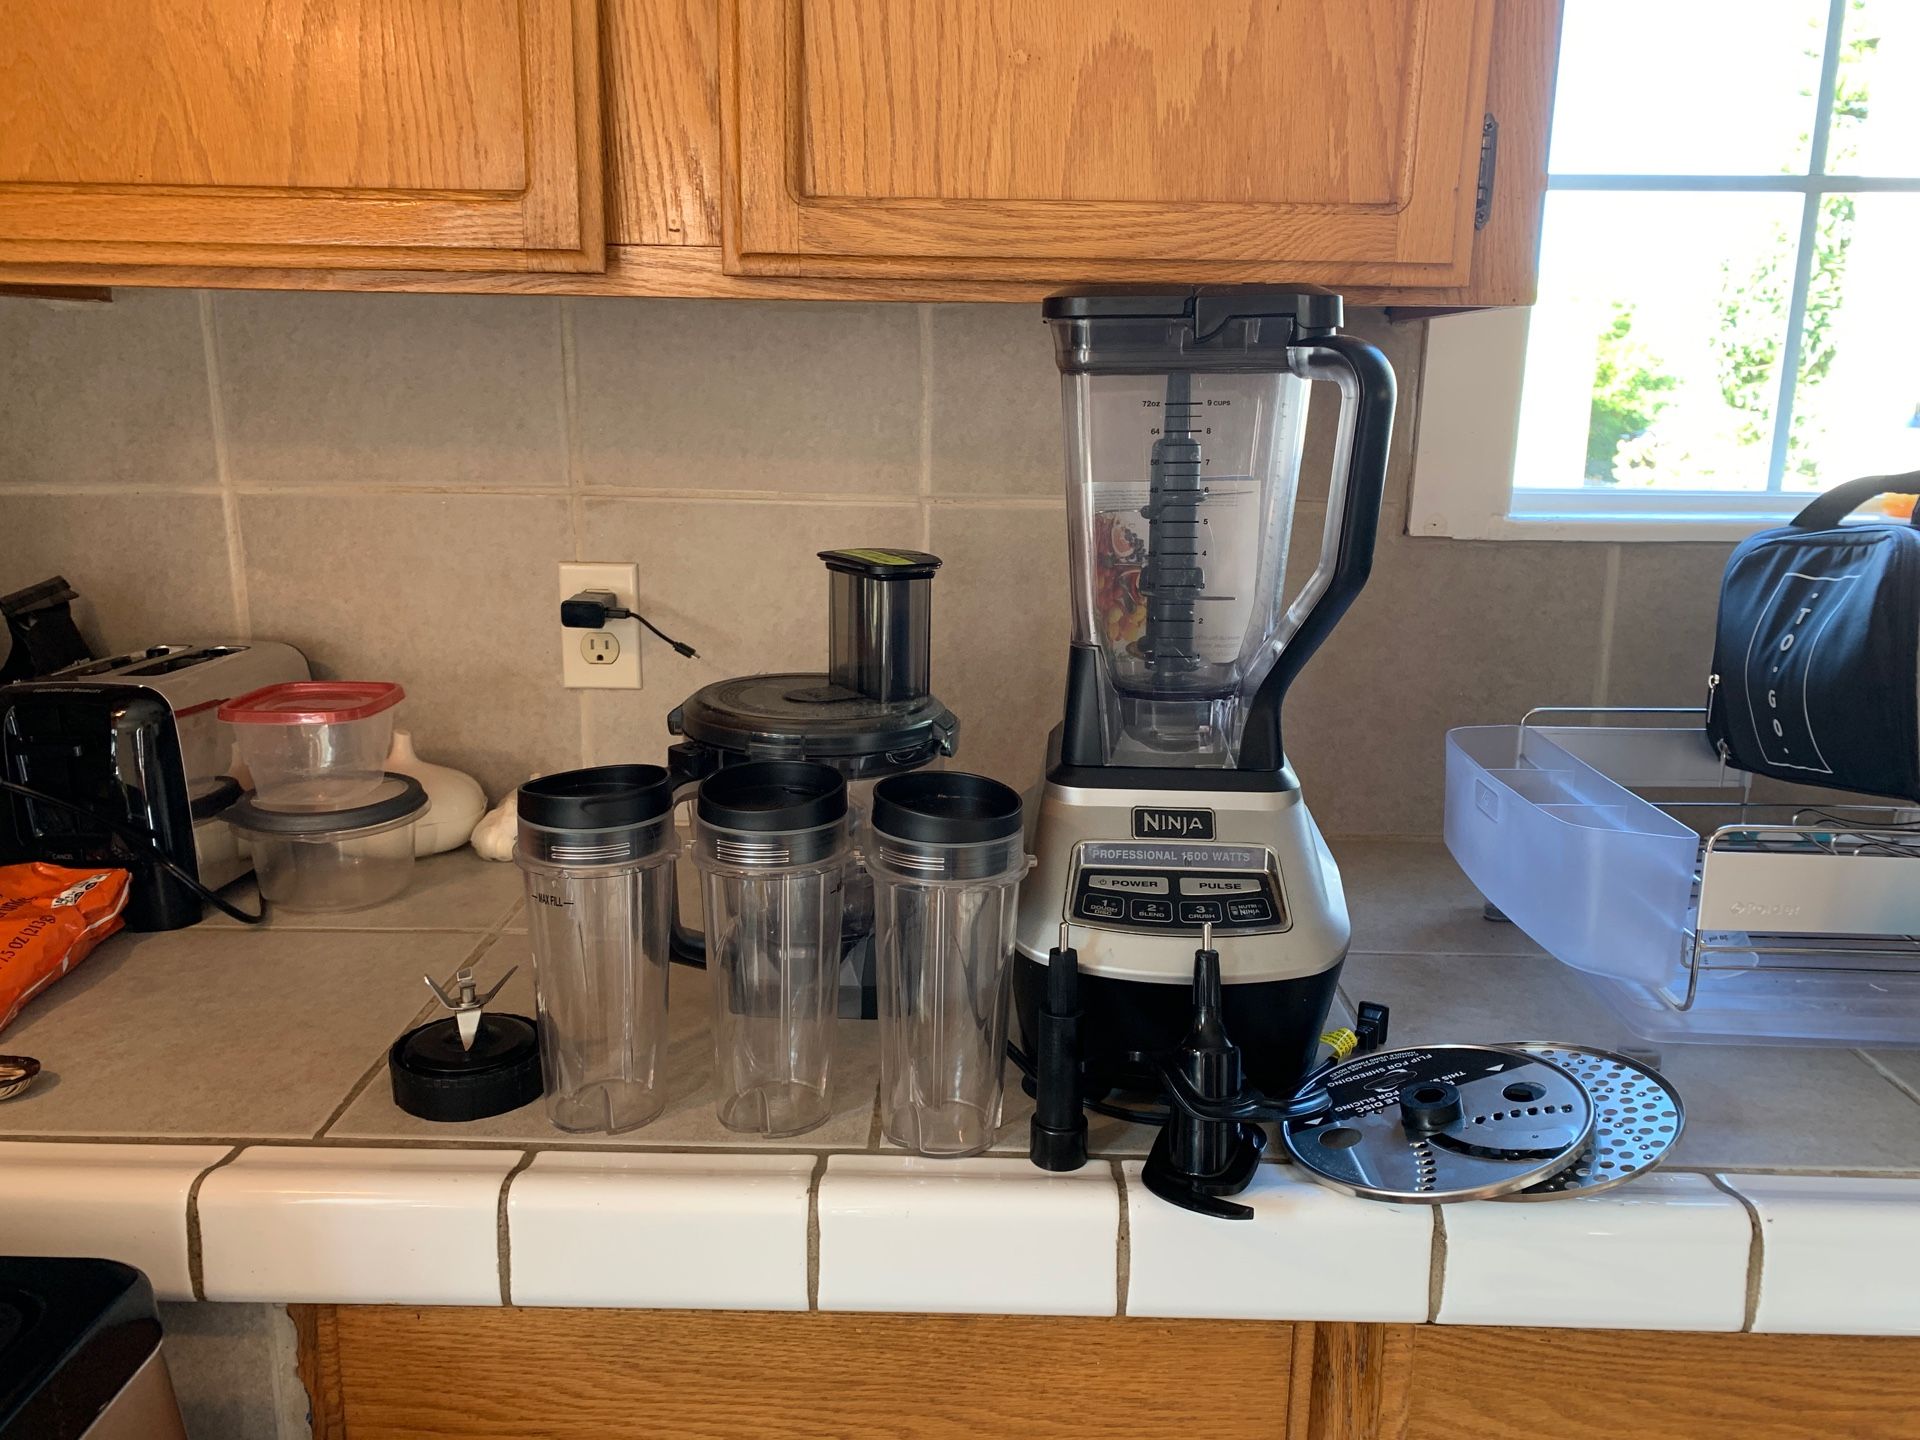 Ninja blender with food processor and cups